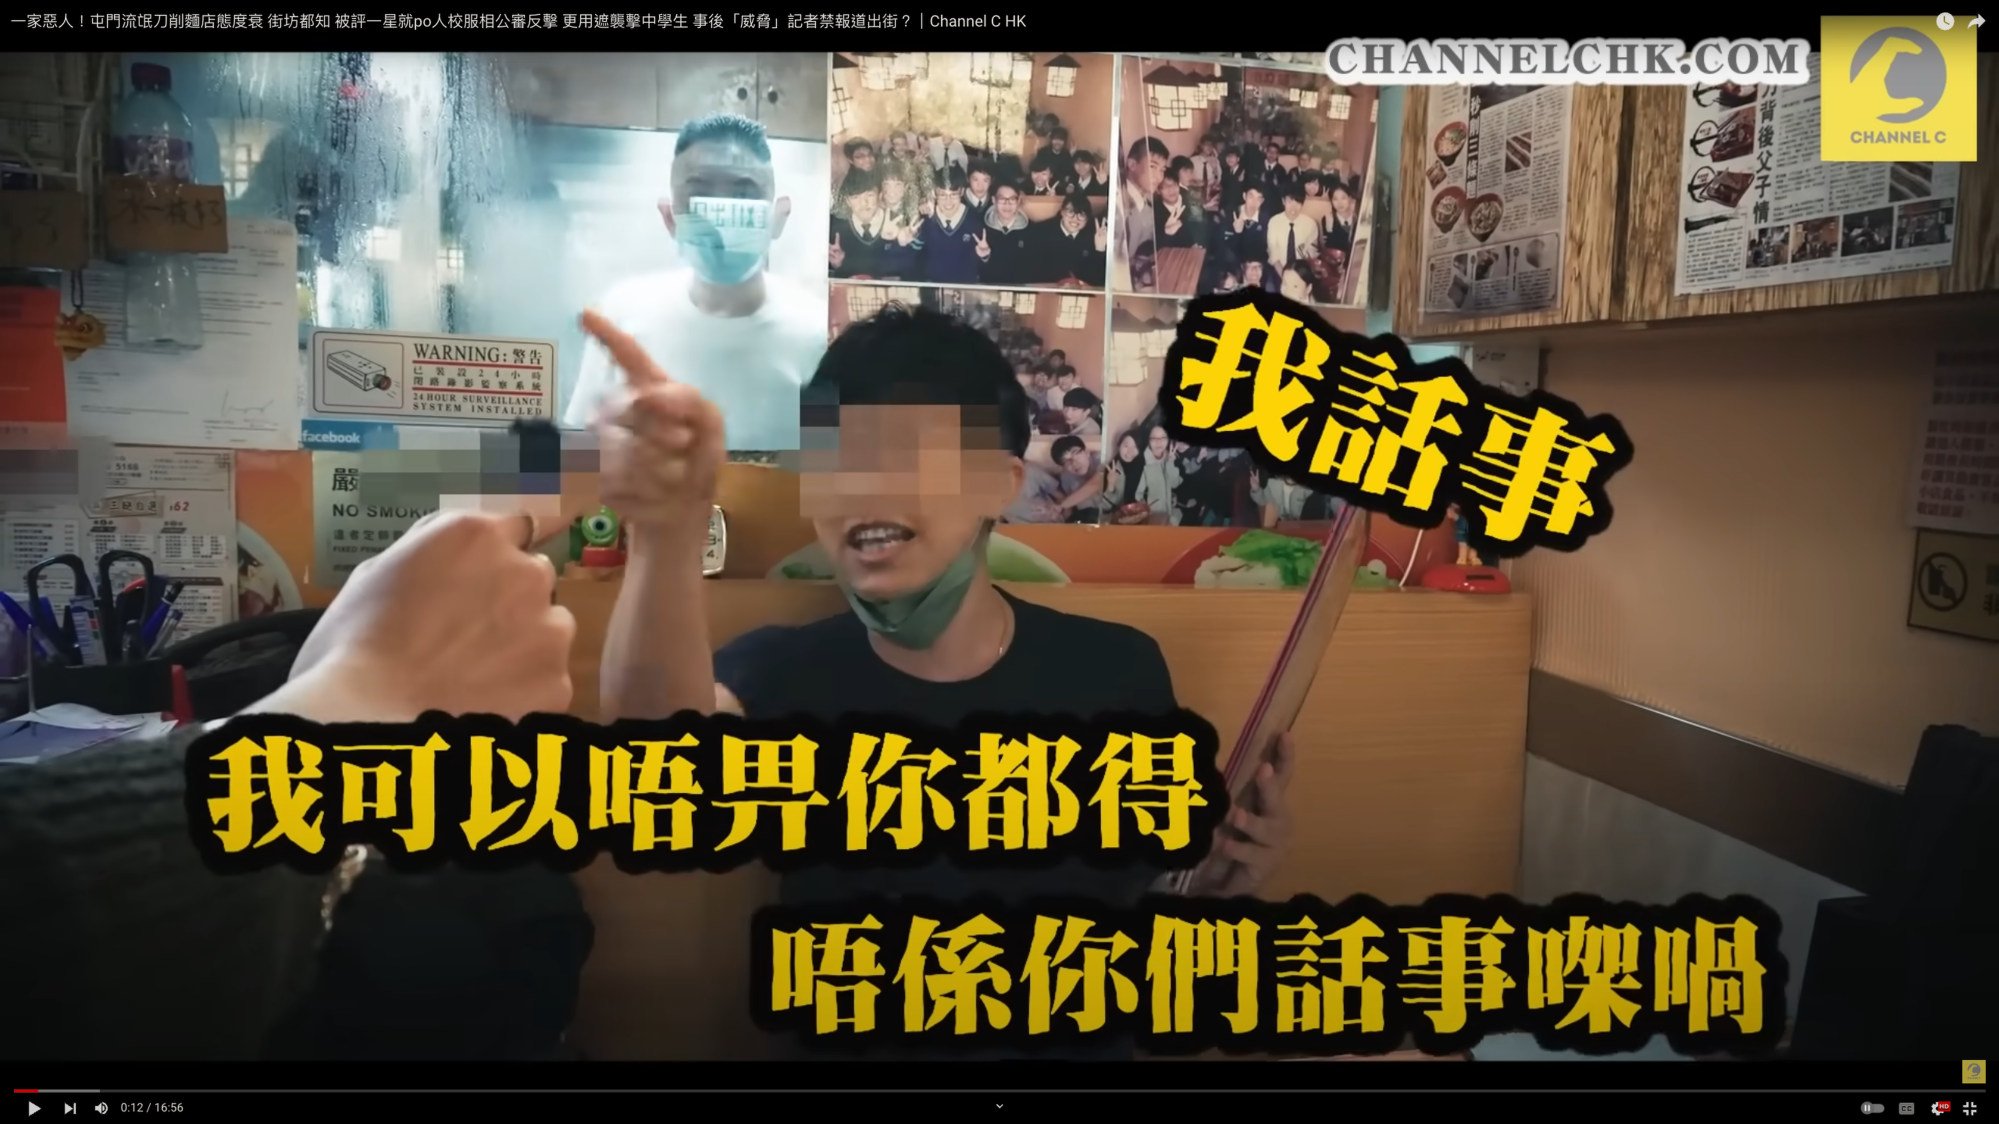 The Yat Bun Noodle Restaurant’s chef has been condemned by internet users after a video of him yelling at a customer went viral. Photo: Channel C